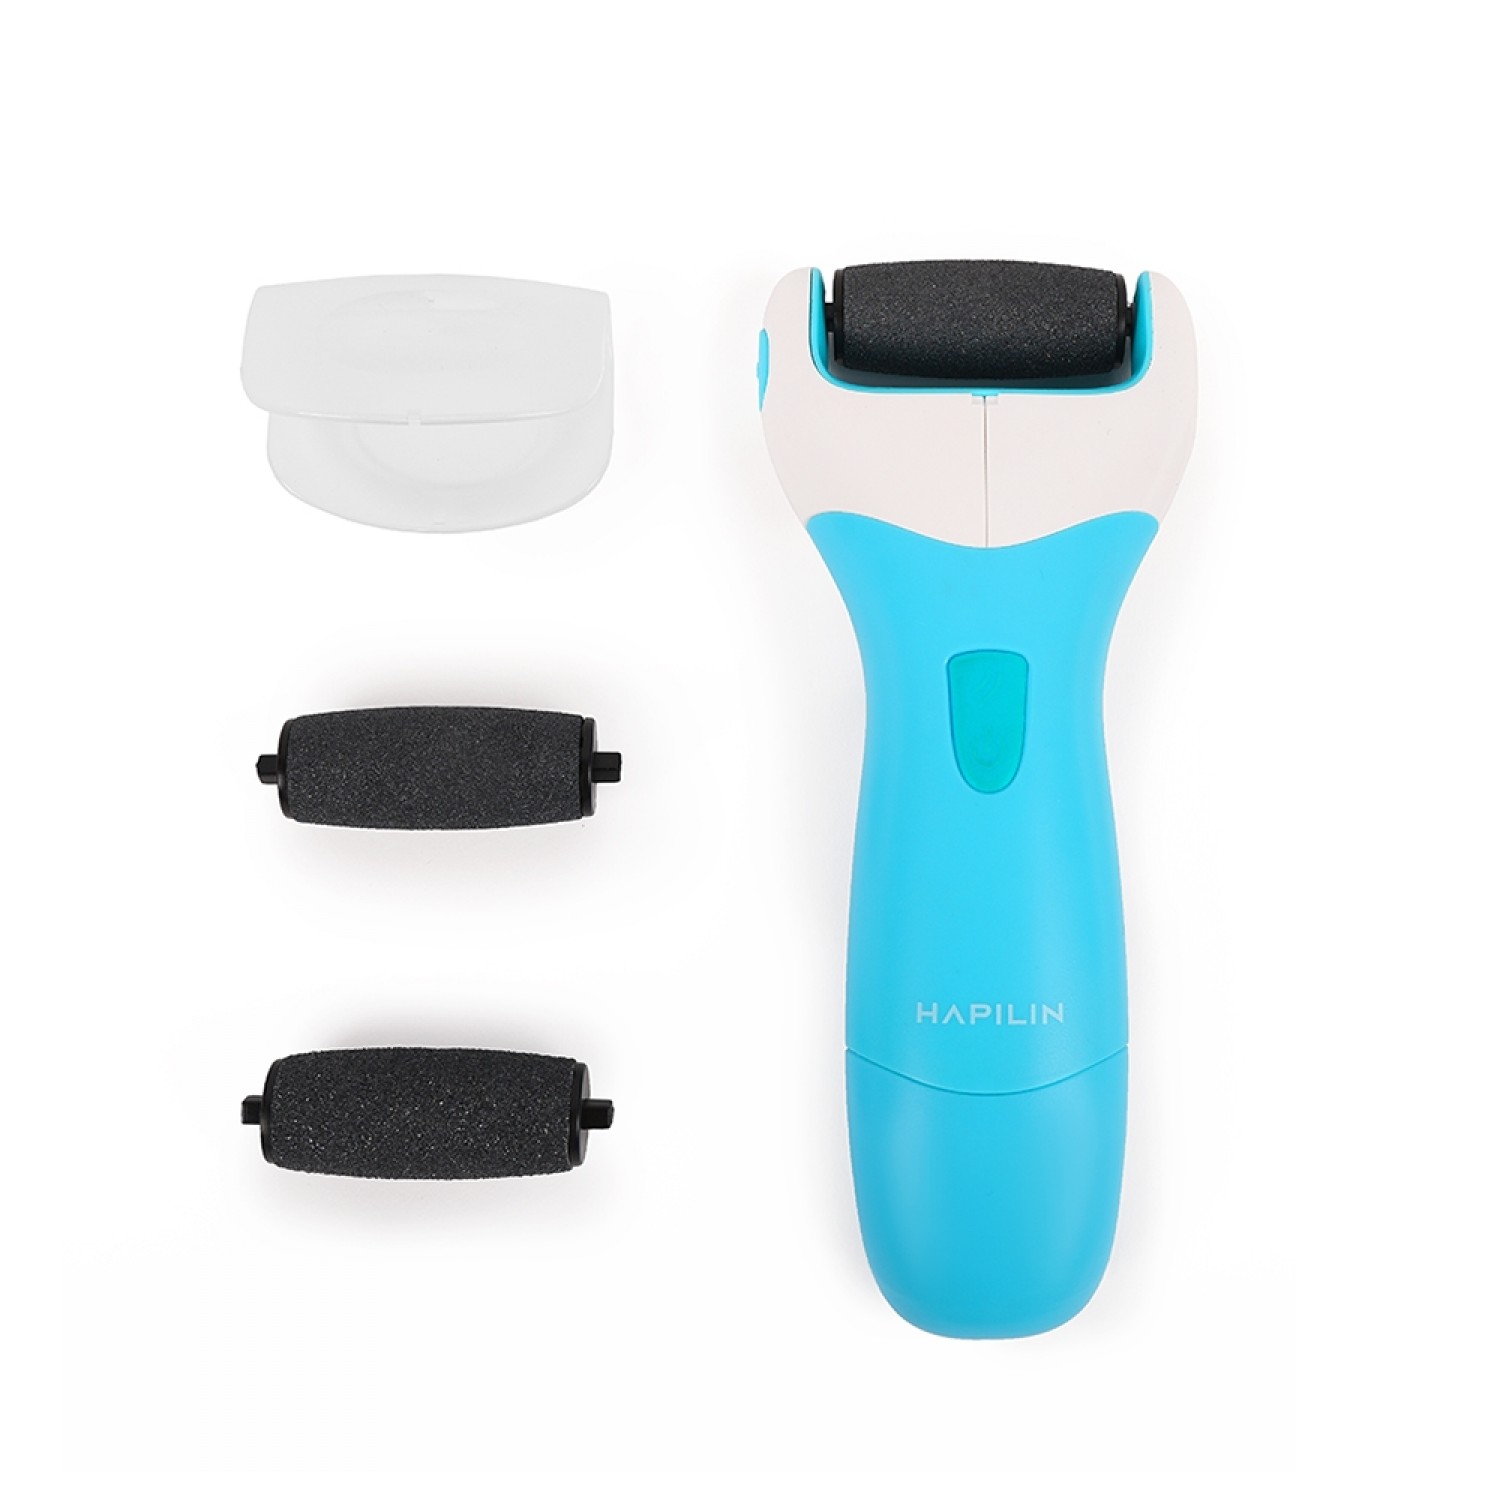 Amble Electric Foot Scrubber Callus Remover for Feet